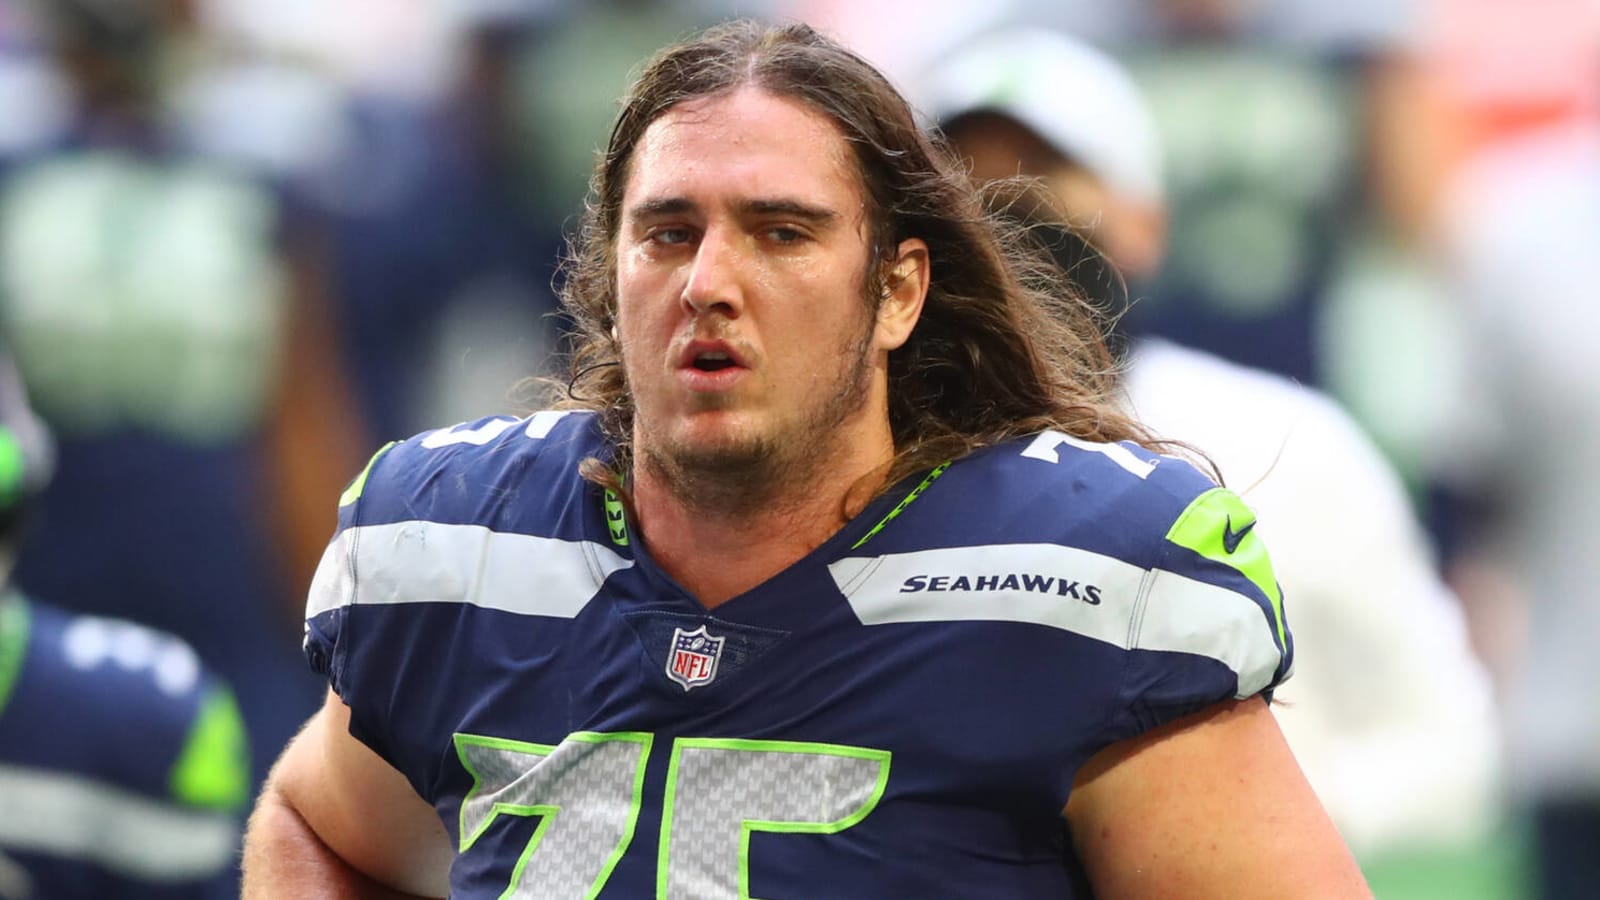 Ex-Seahawks player found guilty of violent attack on girlfriend